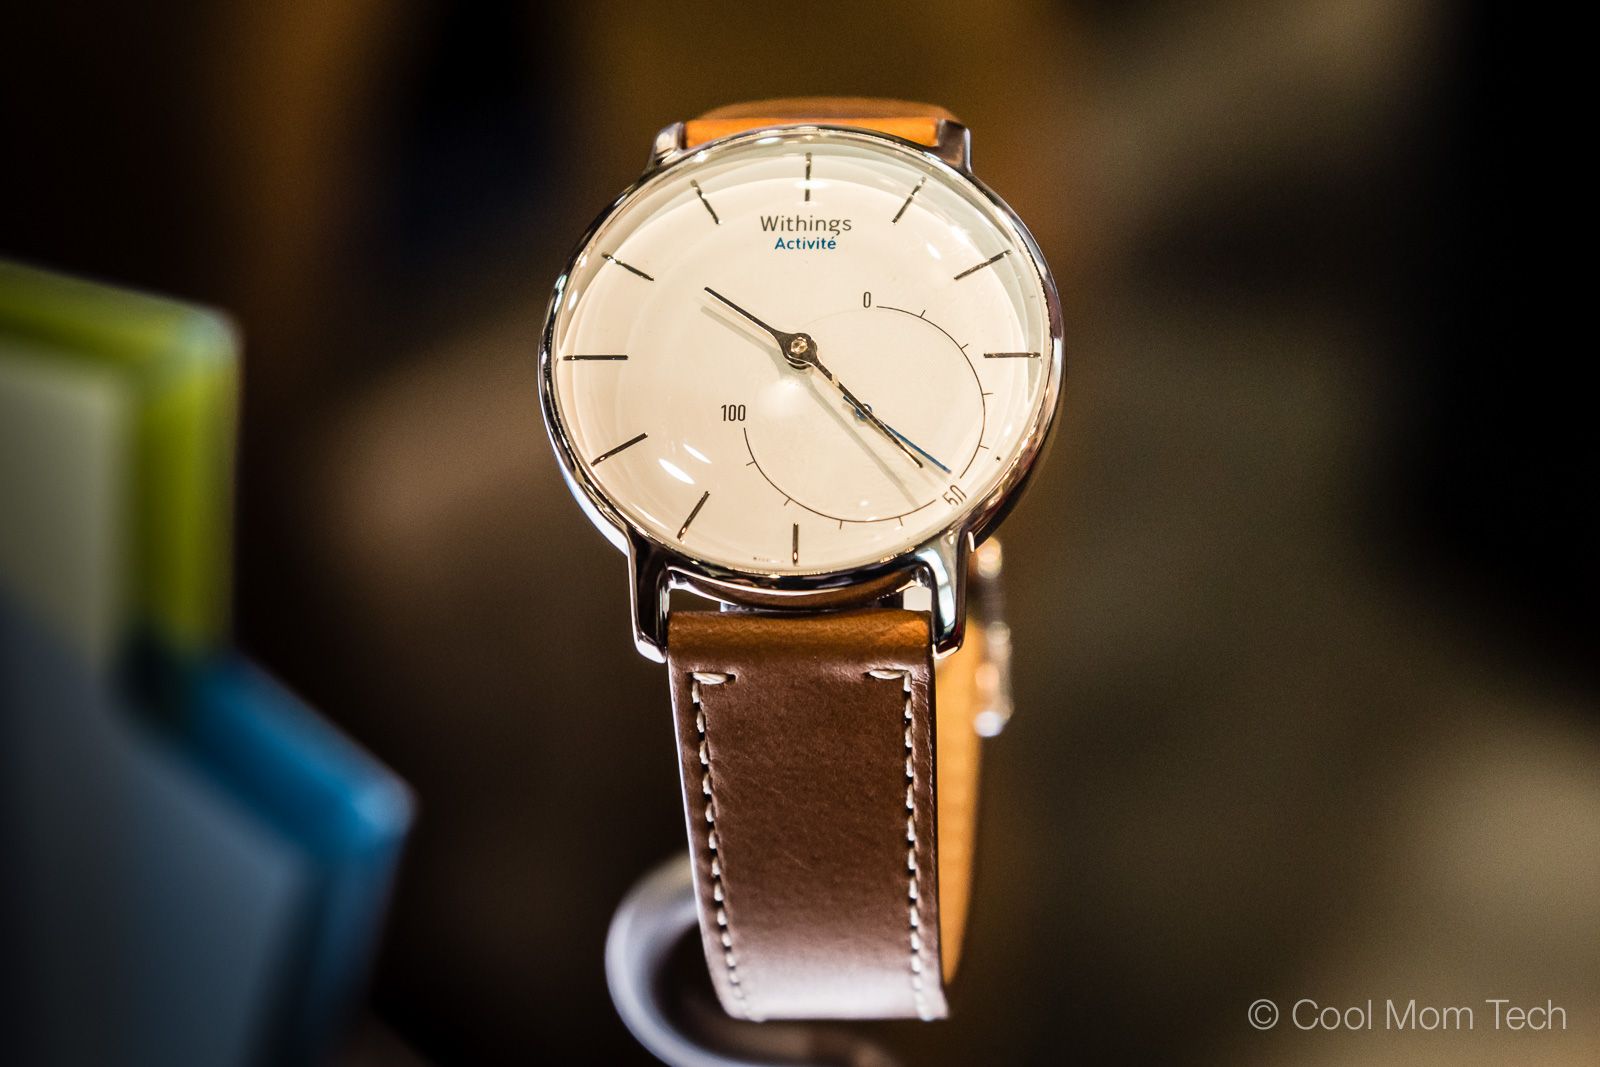 Coolest new tech gadgets of 2015: Withings watch and fitness tracker | Cool Mom Tech Editors' Best